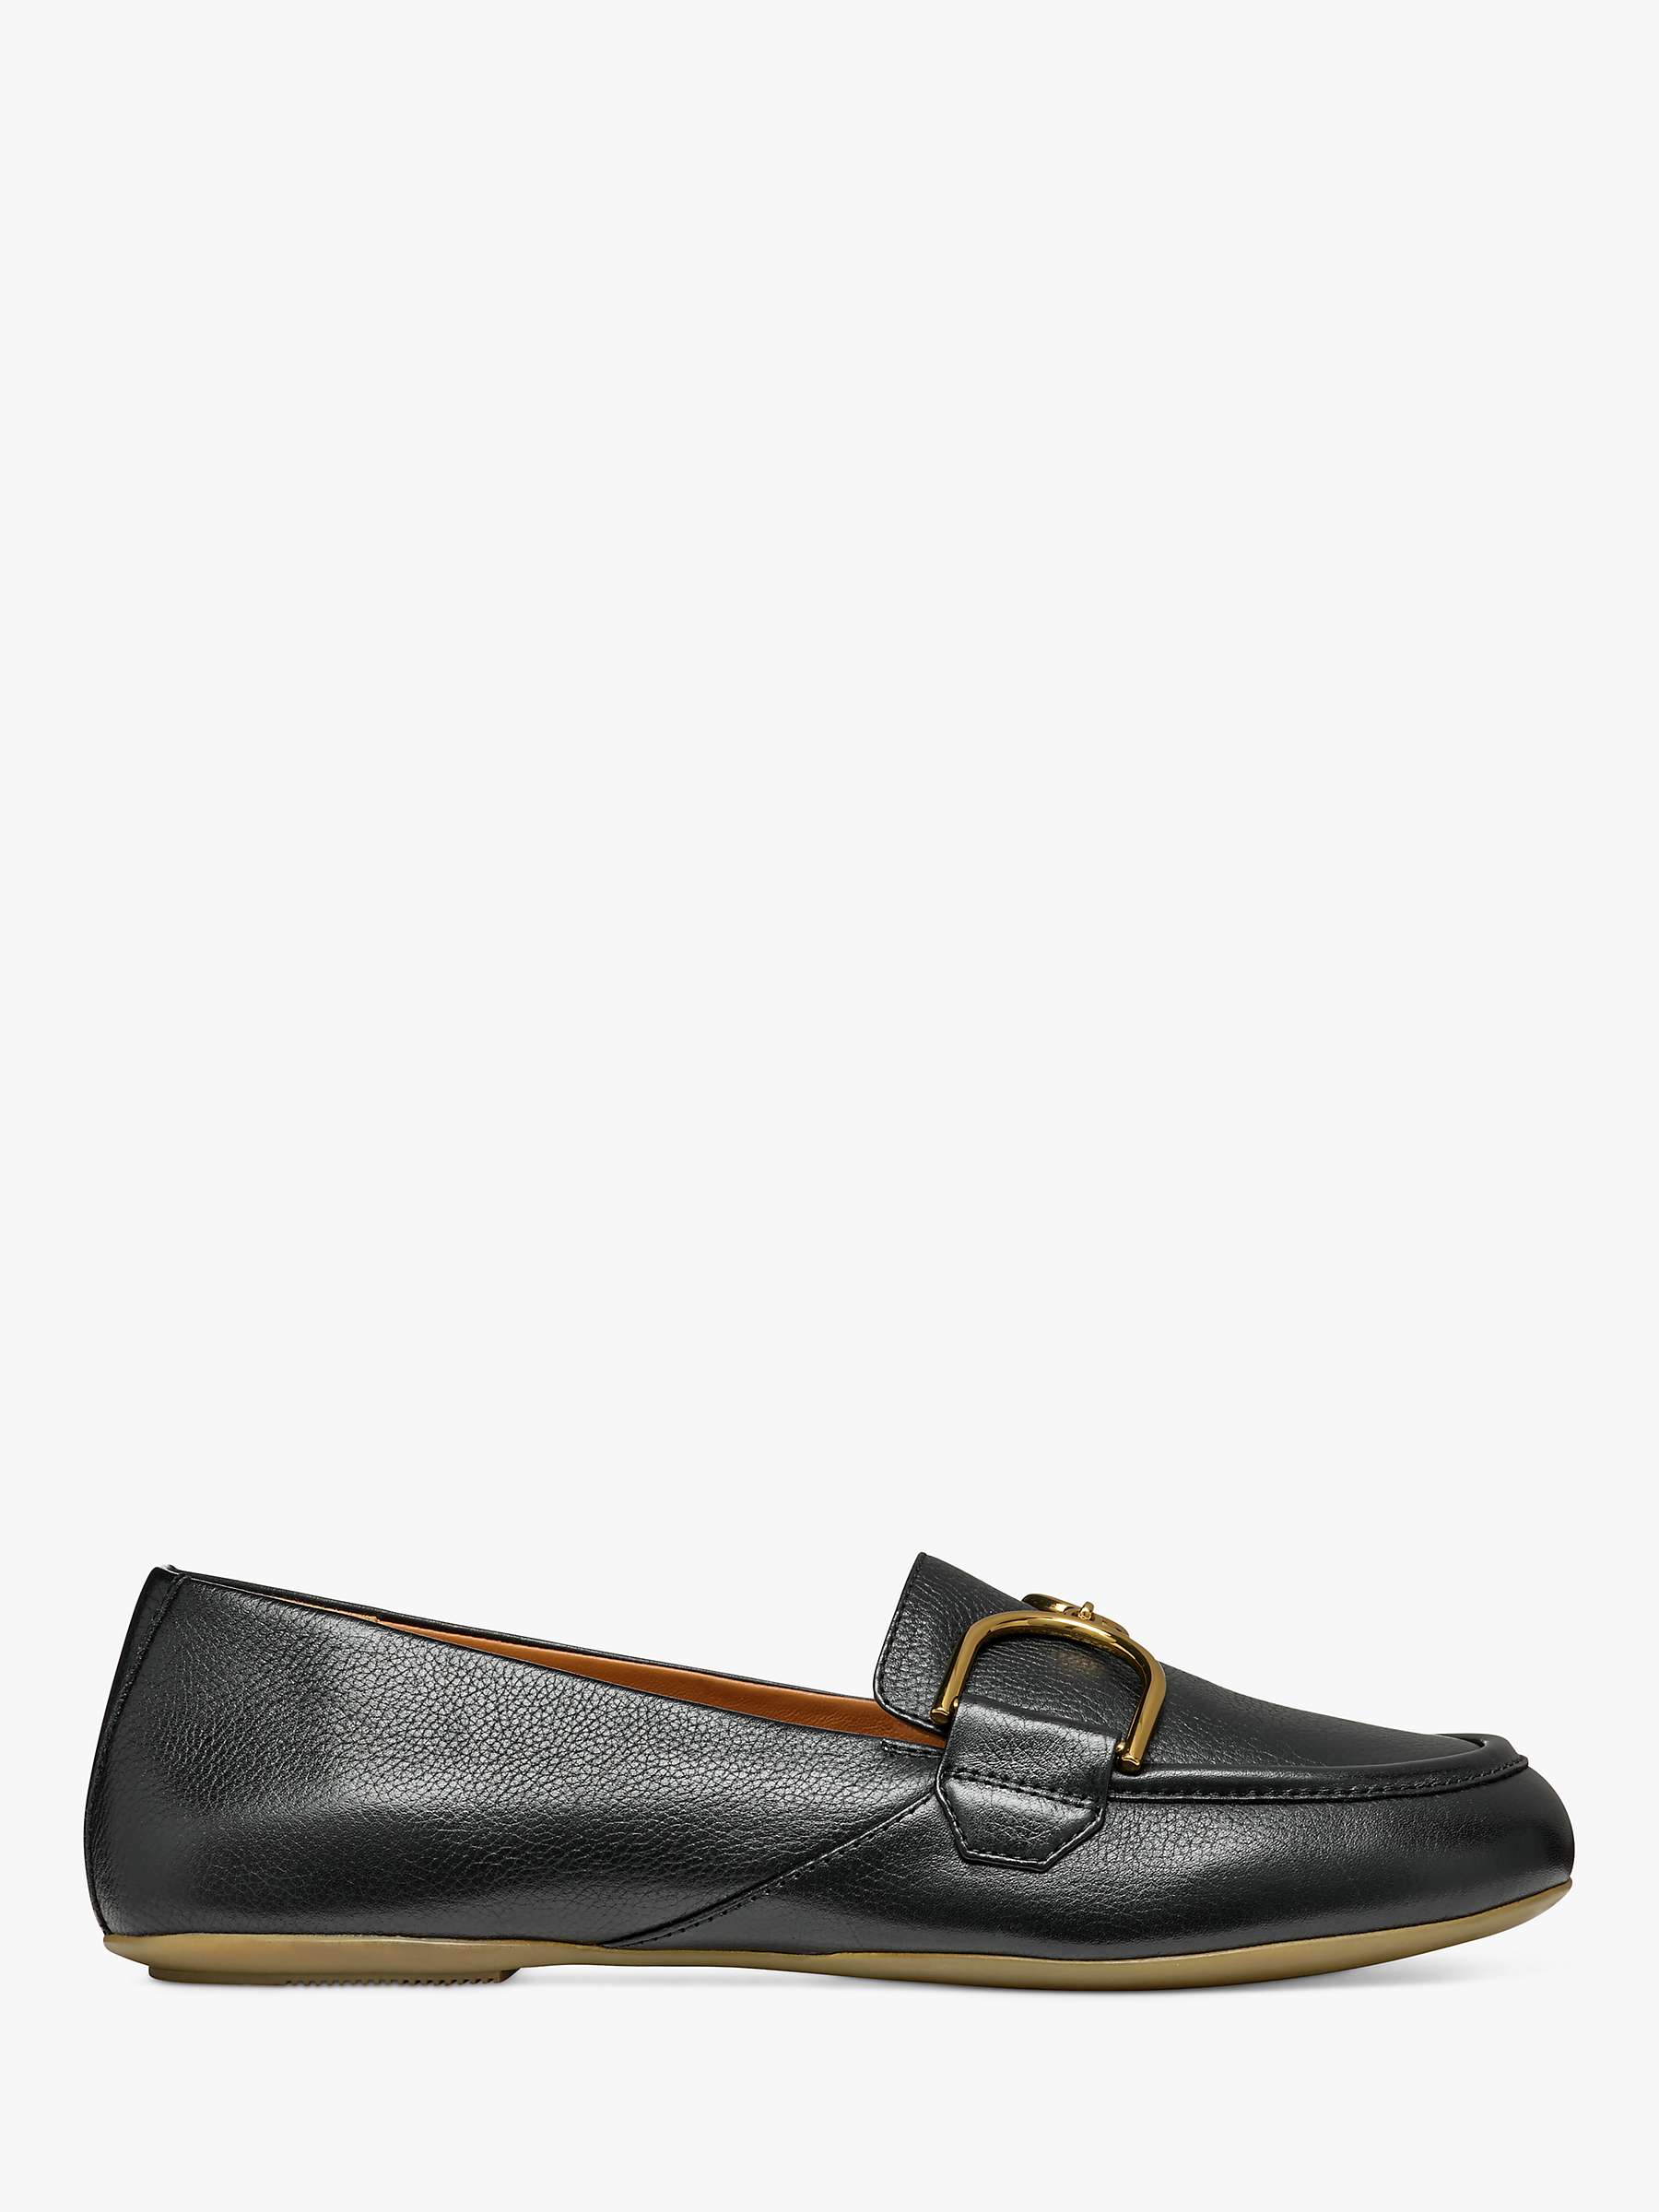 Buy Geox Palmaria Leather City Loafers, Black Online at johnlewis.com